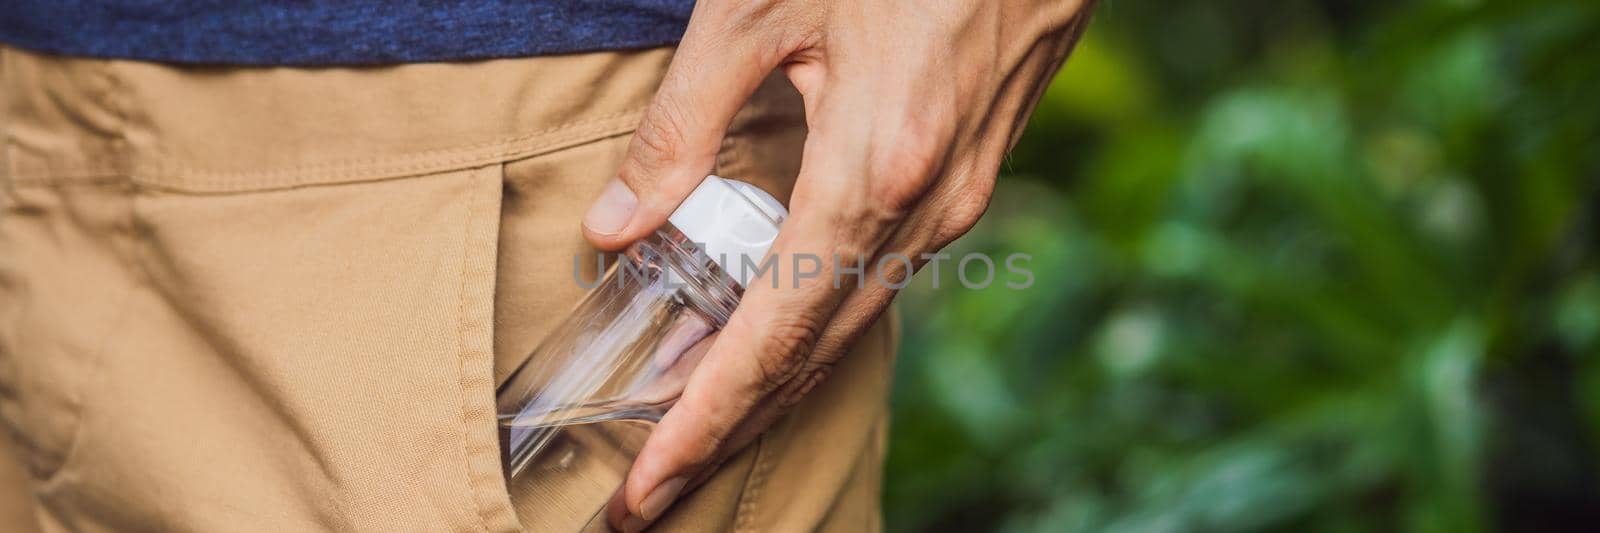 man put a hand sanitizer gel into his trouser pocket when he is going to go outside during corovid -19 outbreak crisis, take care of personal health. BANNER, LONG FORMAT